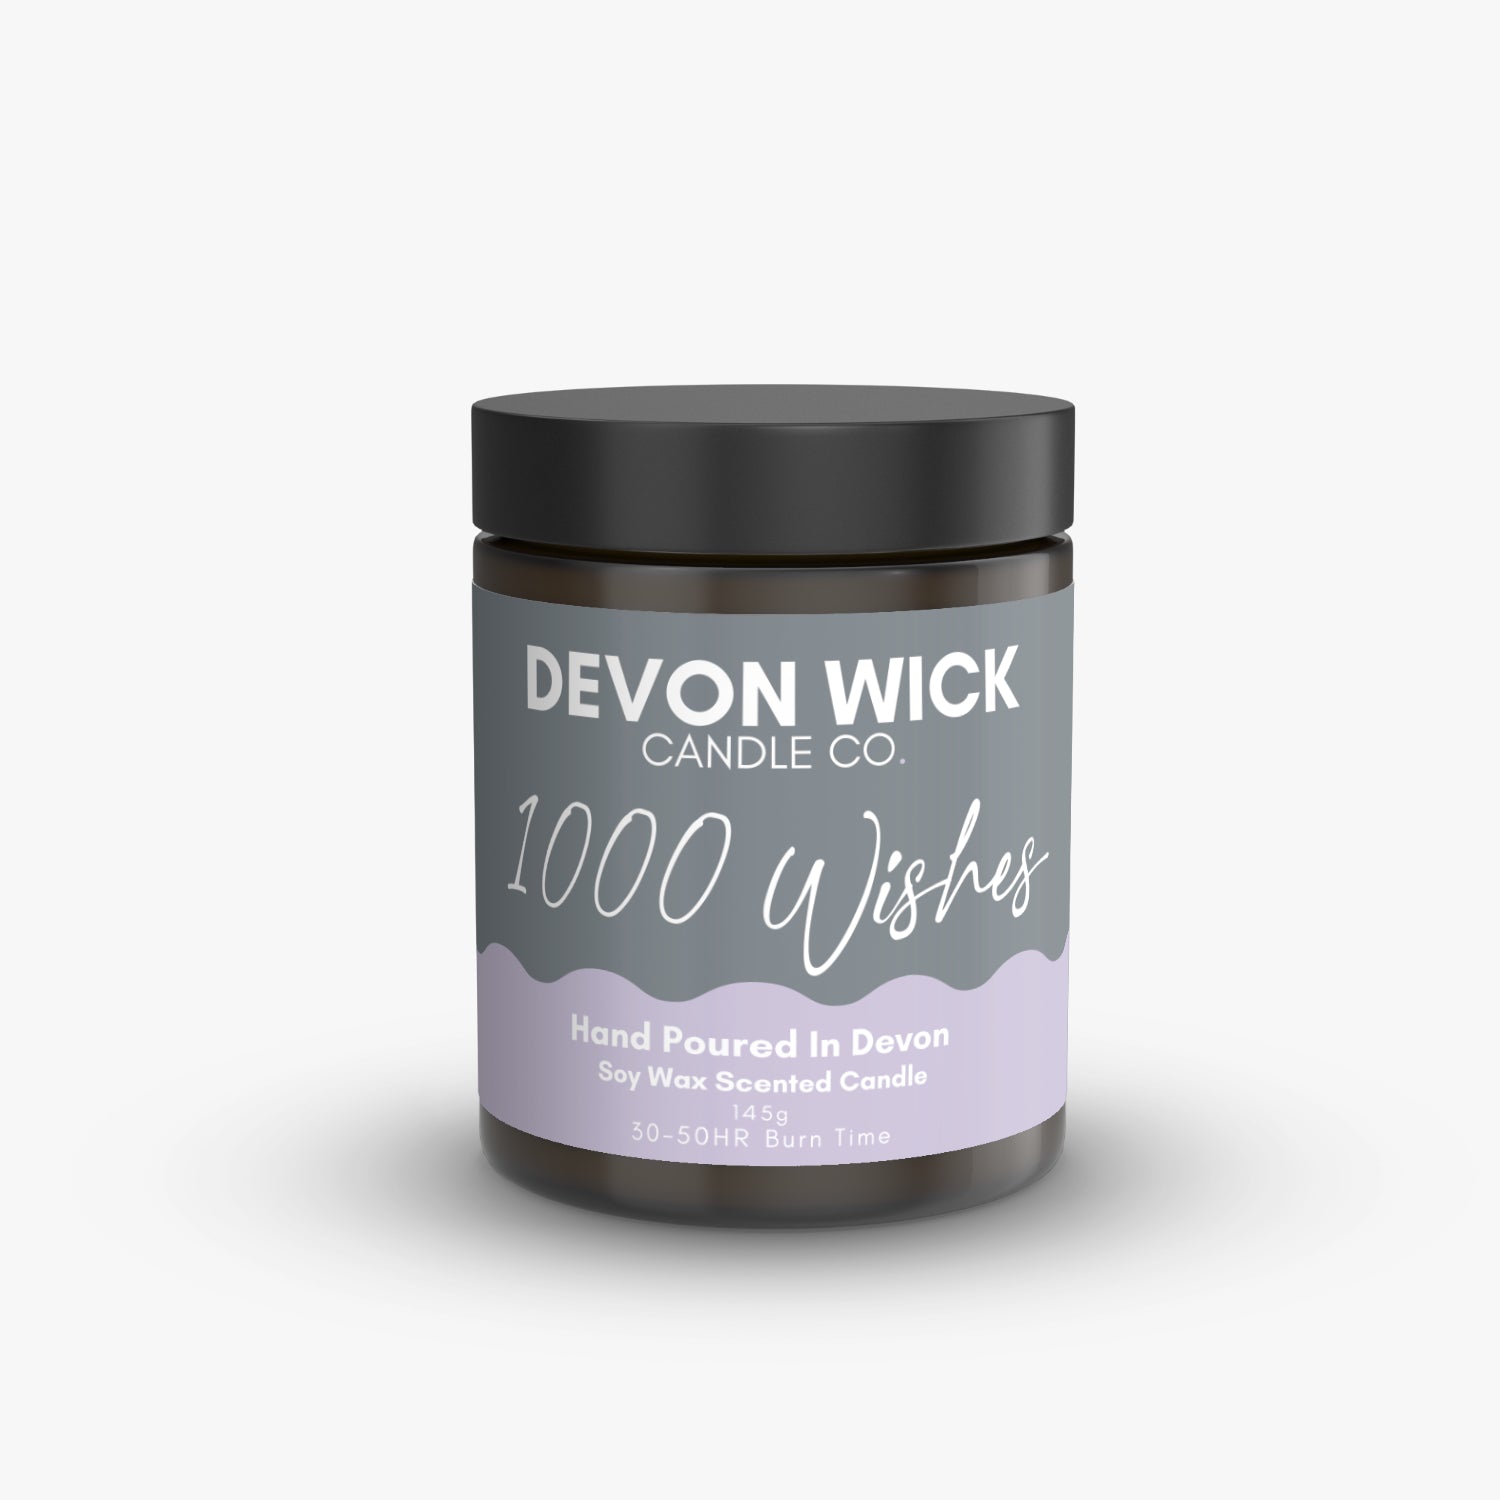 Devon Wick Candle Co. Limited 1000 Wishes Soy Wax Candle